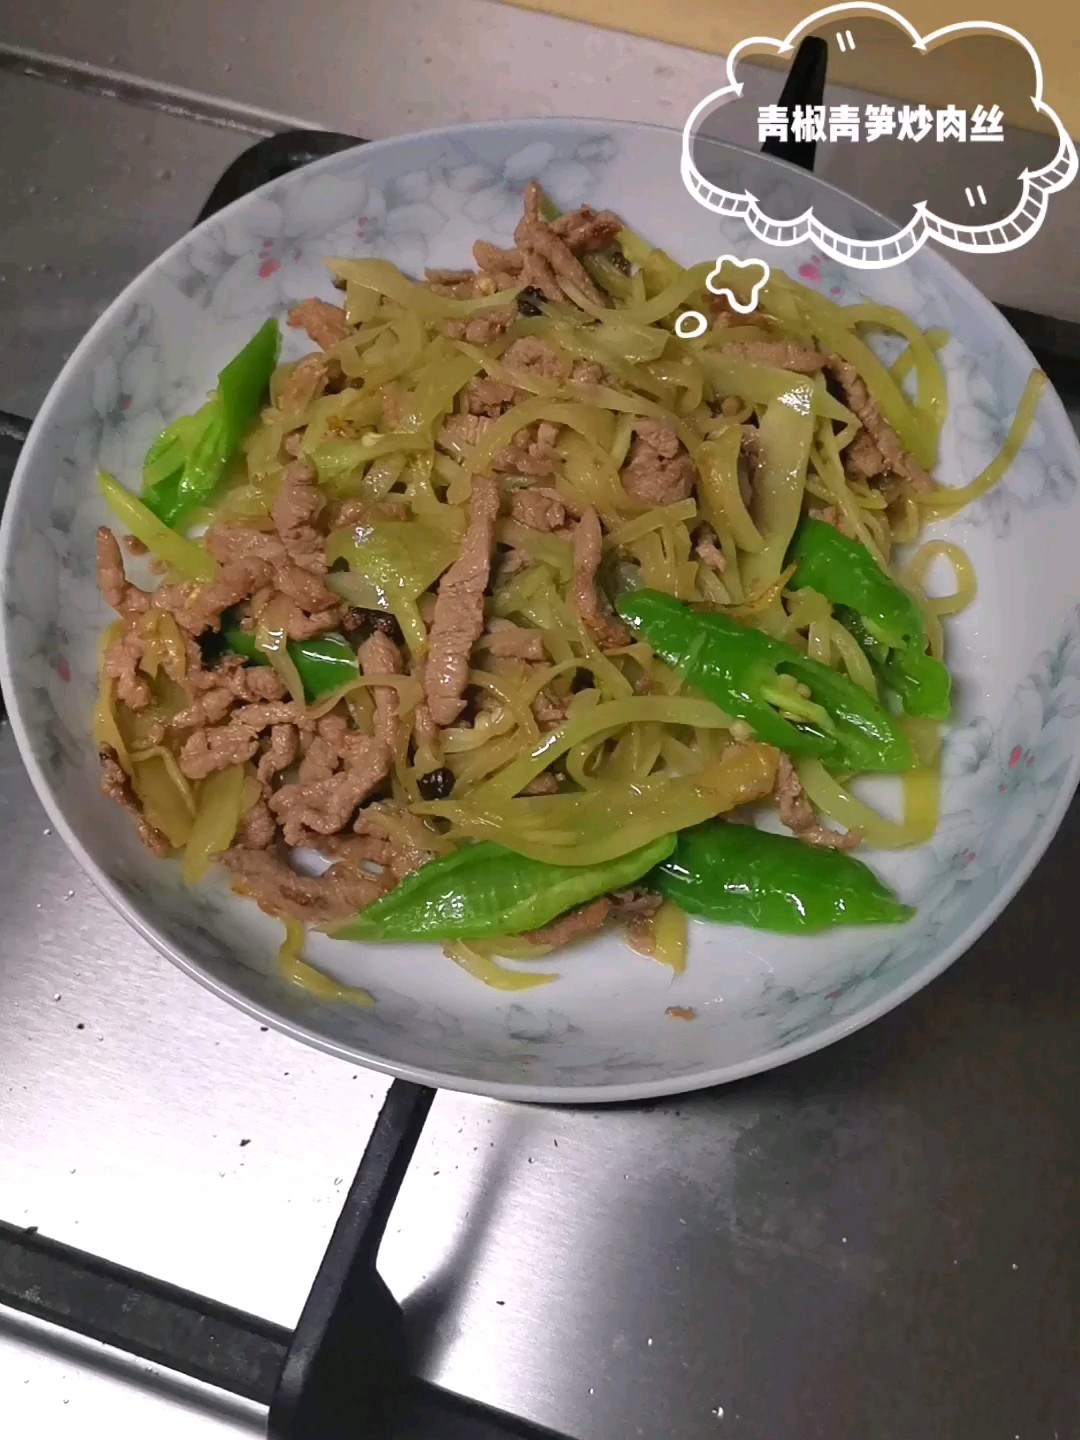 Stir-fried Shredded Pork with Green Pepper and Bamboo Shoot recipe